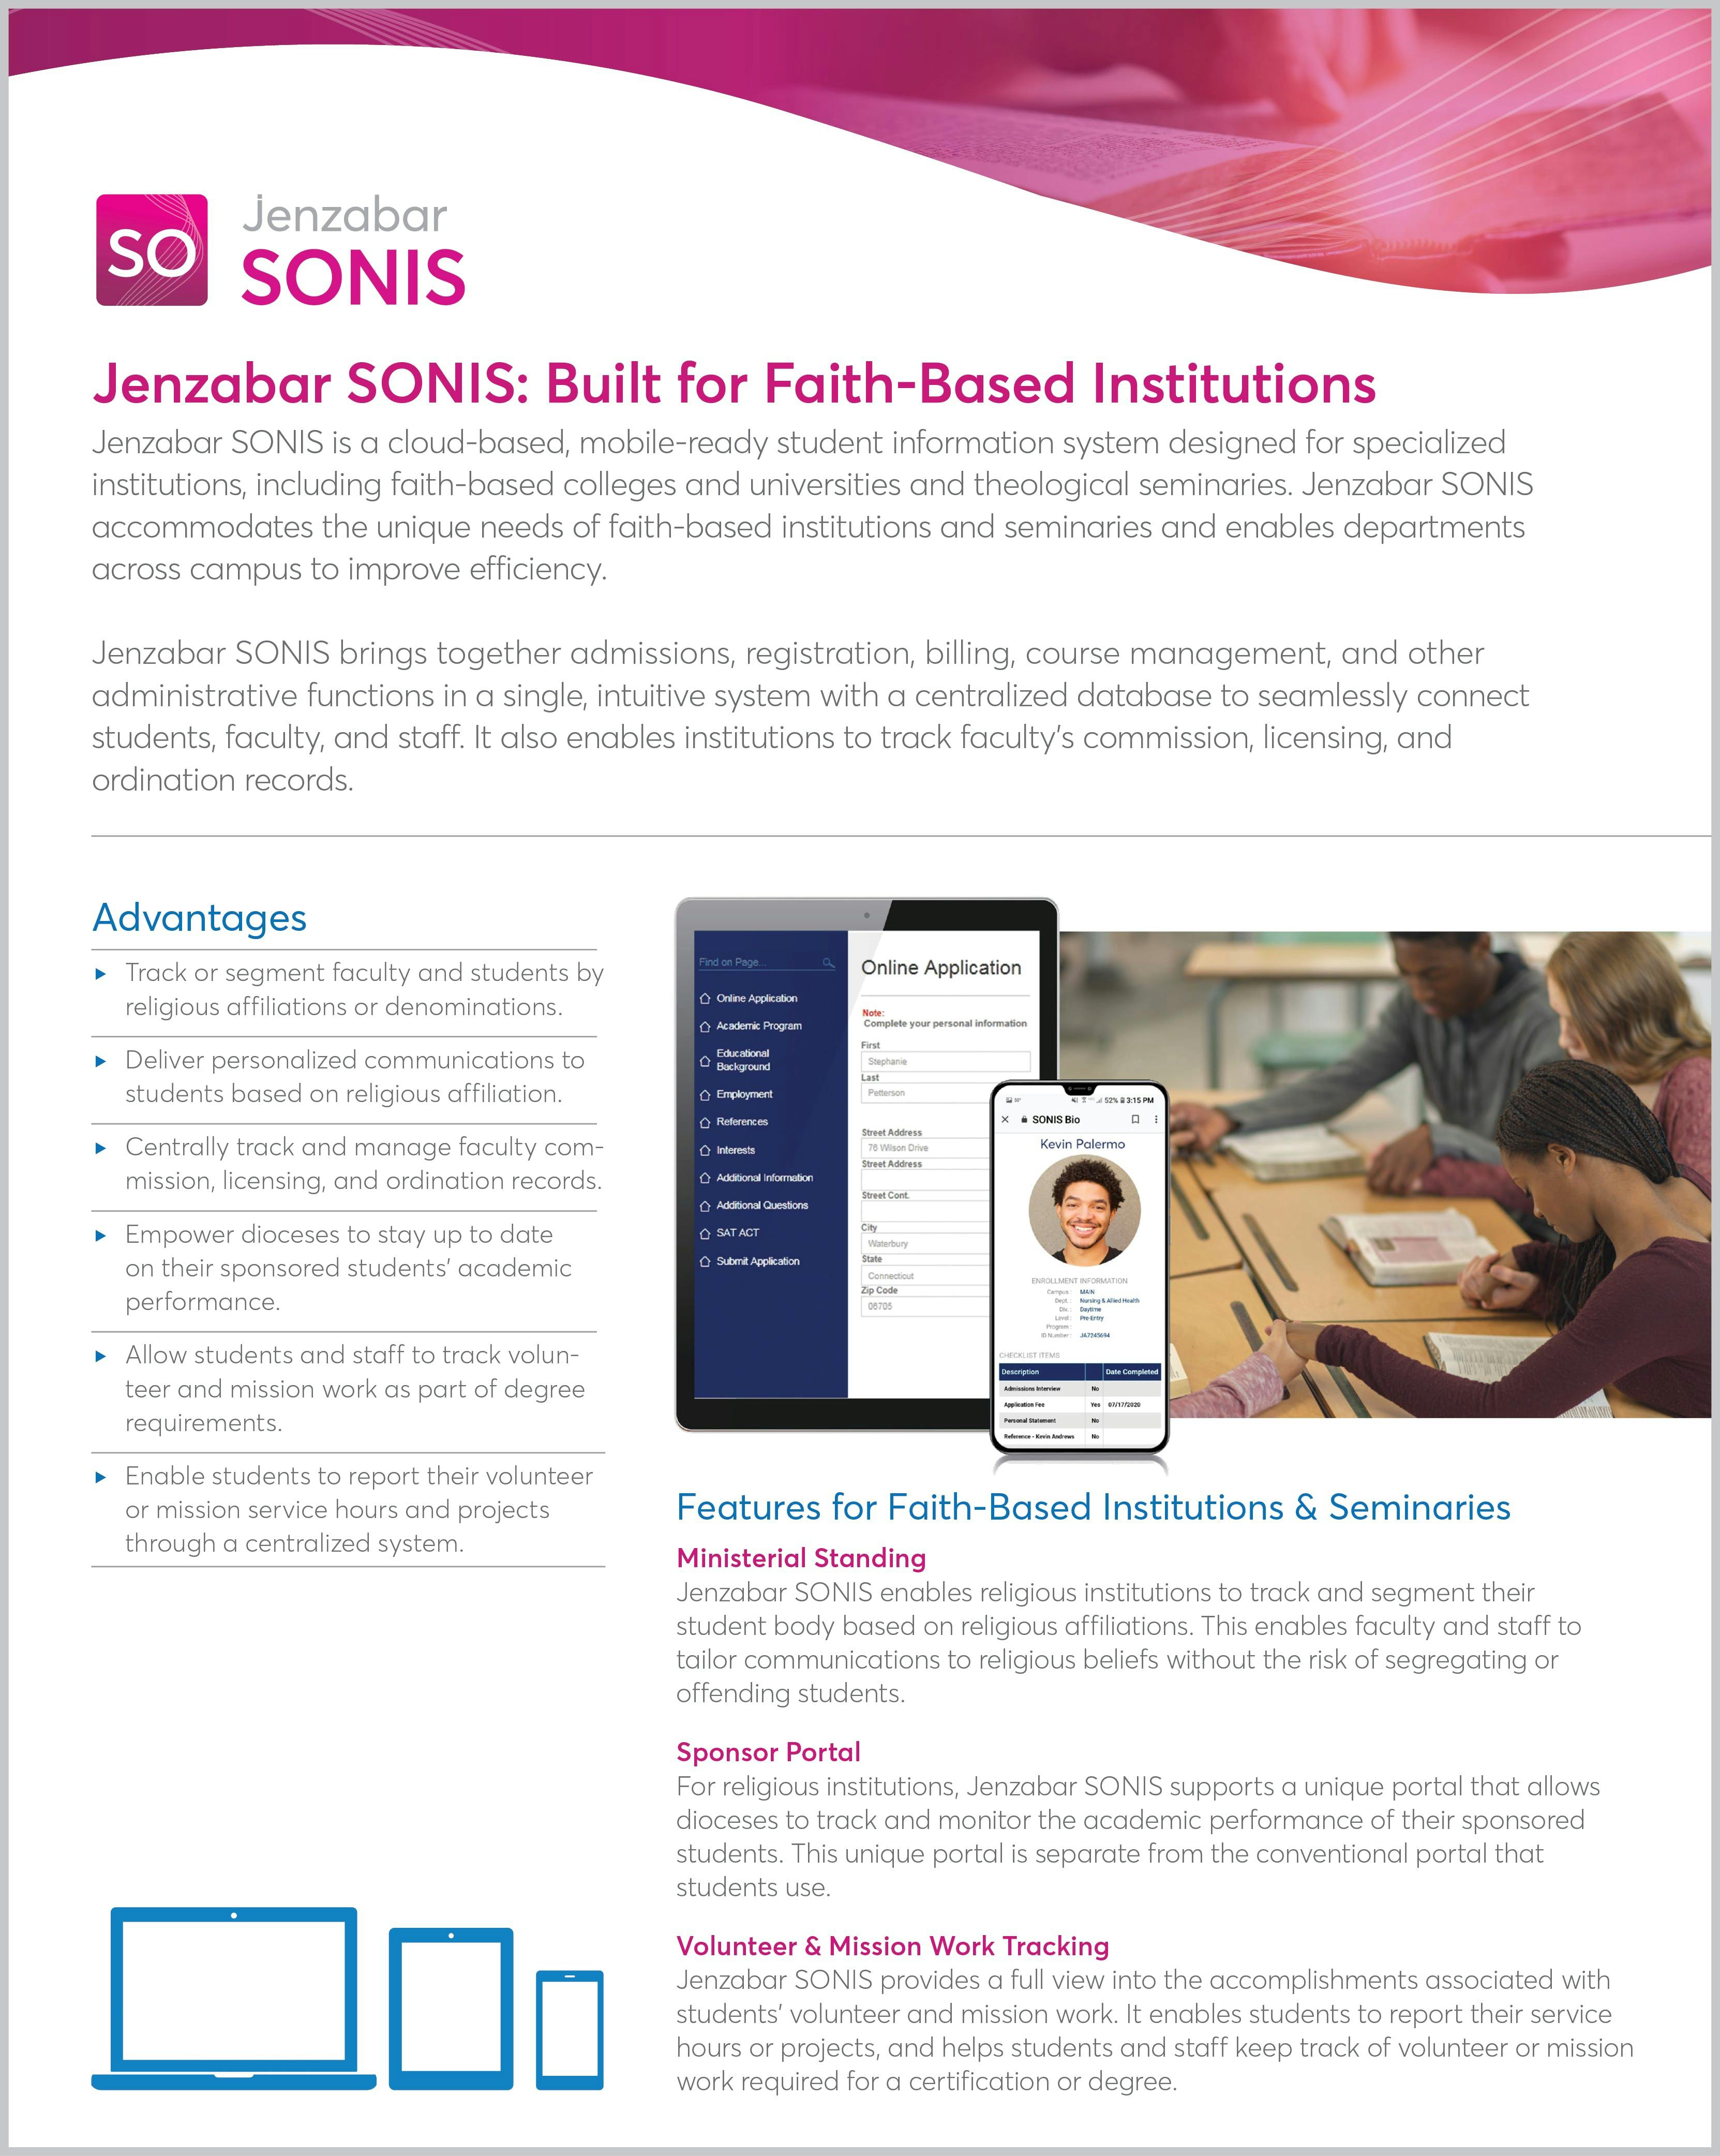 Product Sheet: Jenzabar SONIS for Faith-Based Institutions